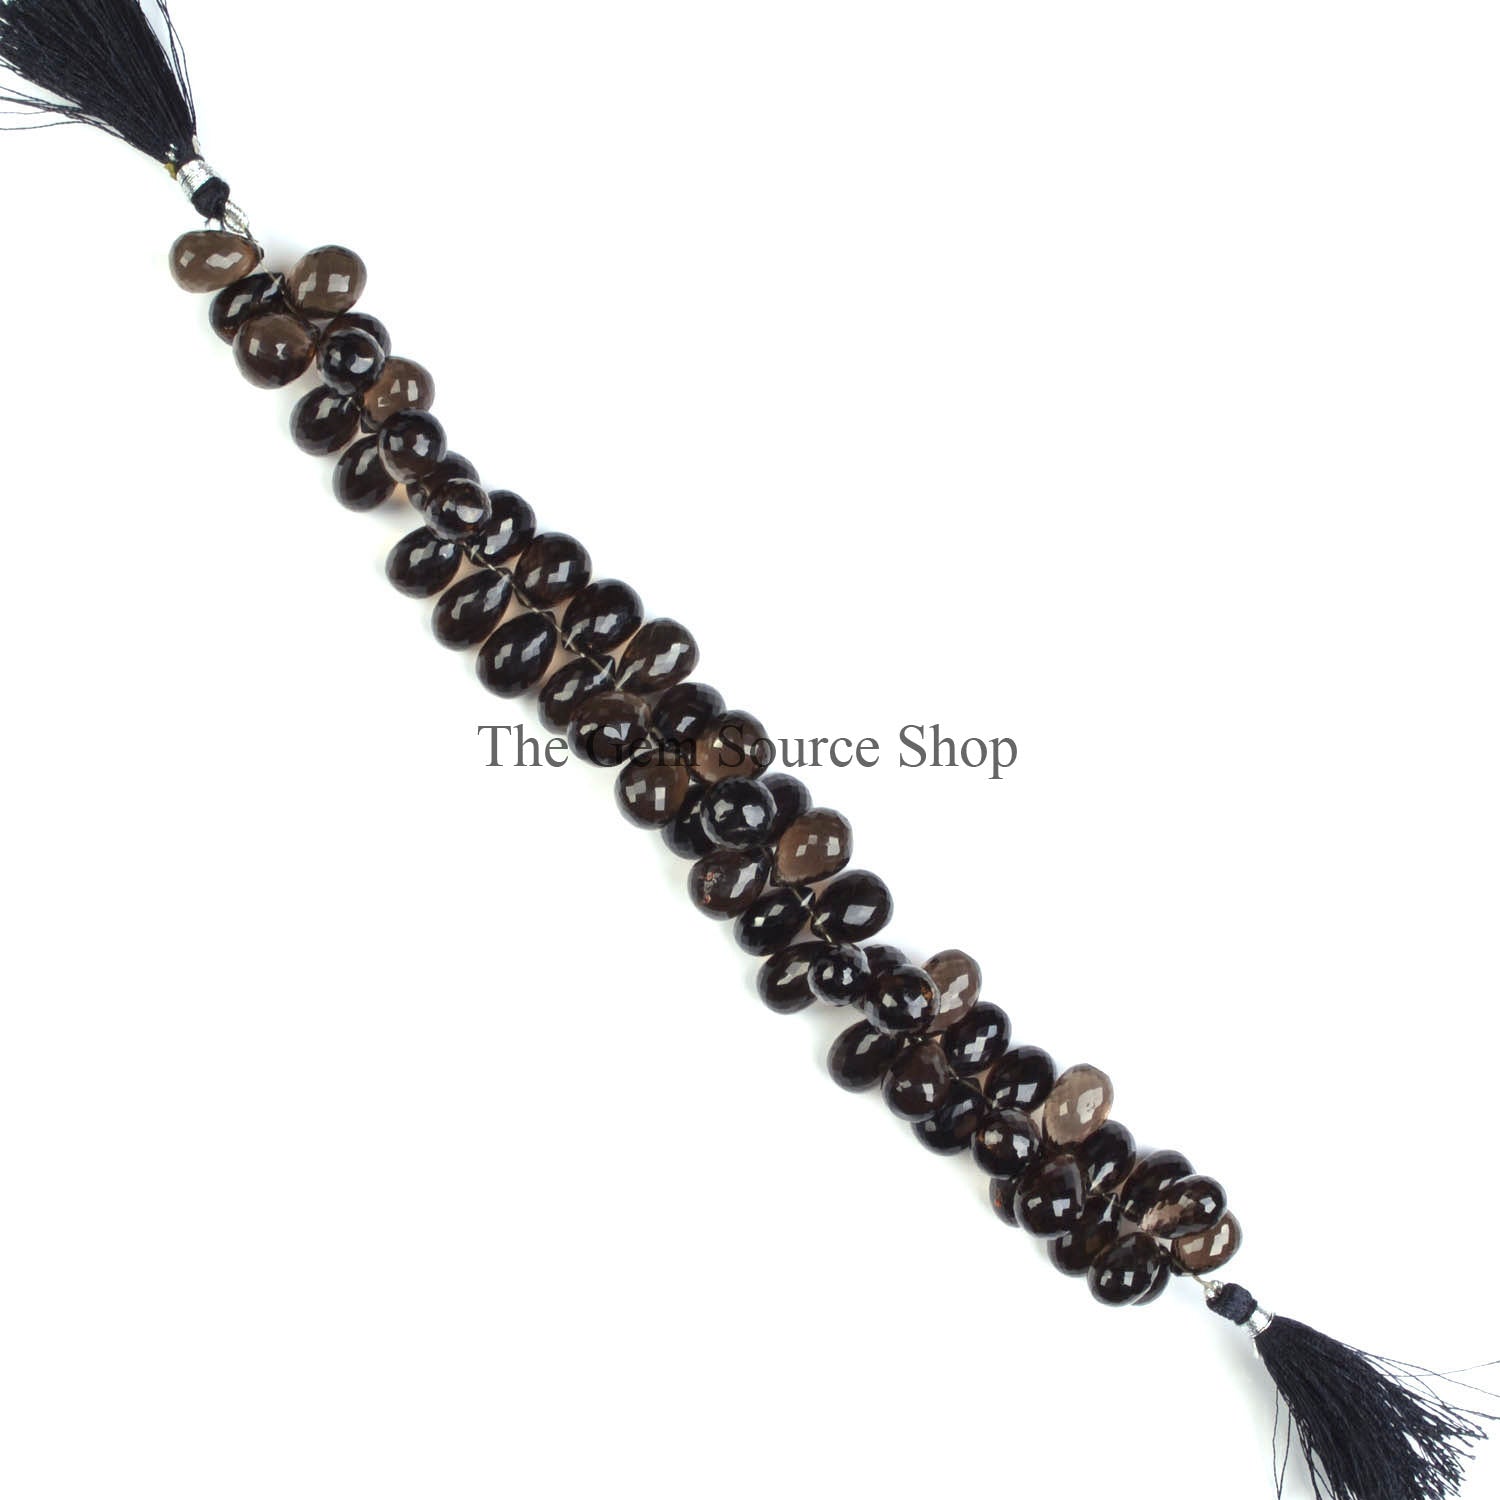 Big Size Smoky Quartz Beads, Faceted Drop Shape Beads, Side Drill Drop Beads, AAA Quality Beads